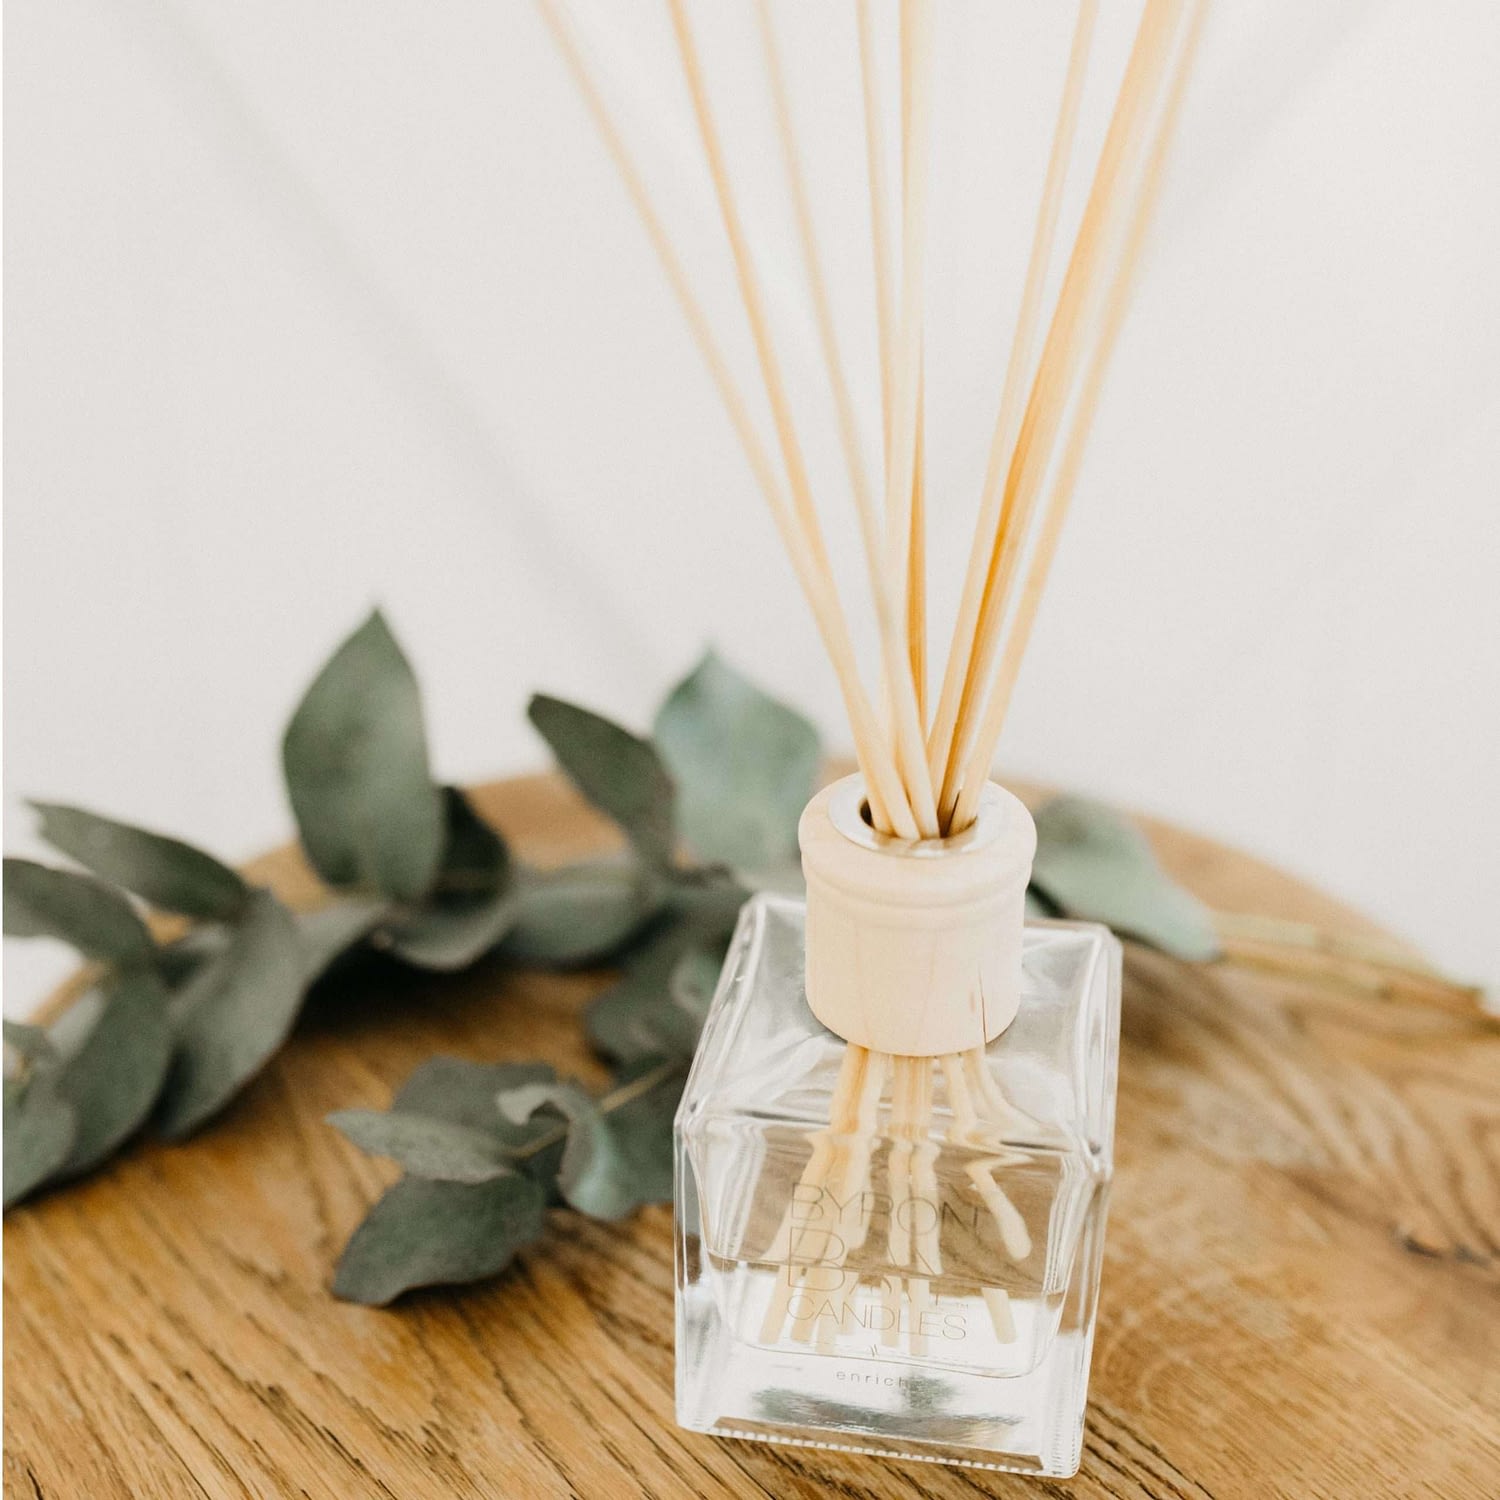 Byron_Bay_Candles_reed_diffuser_square